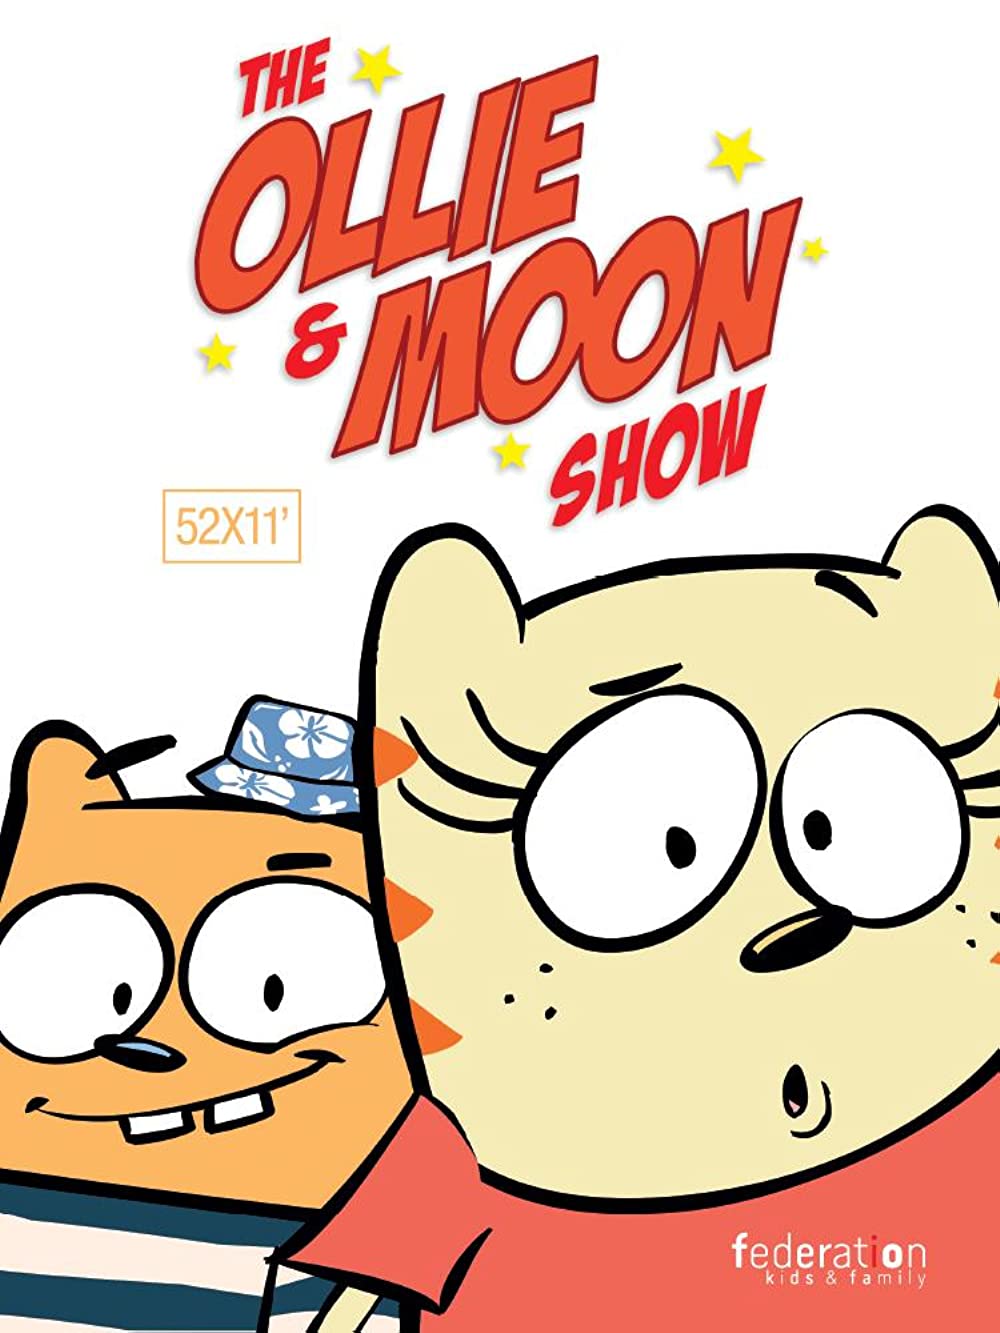 The Ollie & Moon Show The Chinese Cookie Caper (TV Episode 2017)